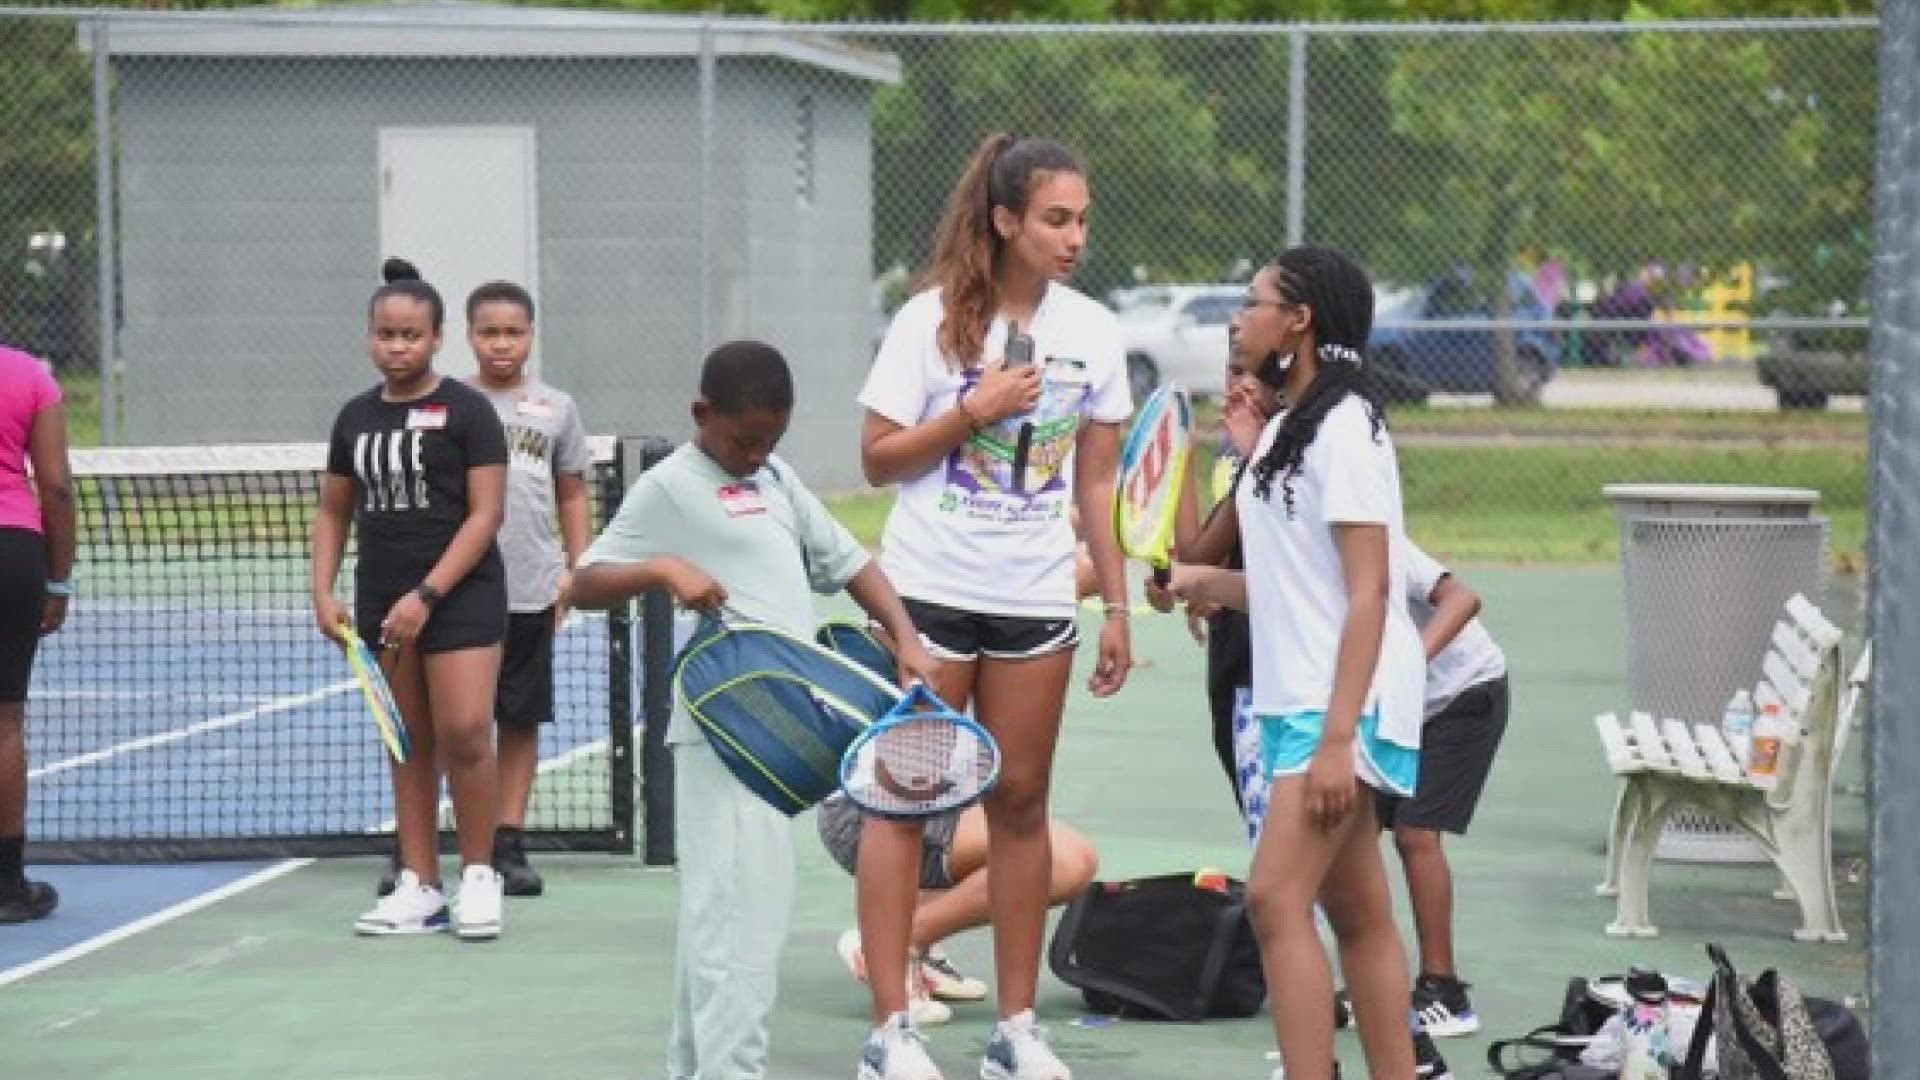 The youth tennis program starts Sept. 3. It's reached full capacity, so they are opening more slots in January.